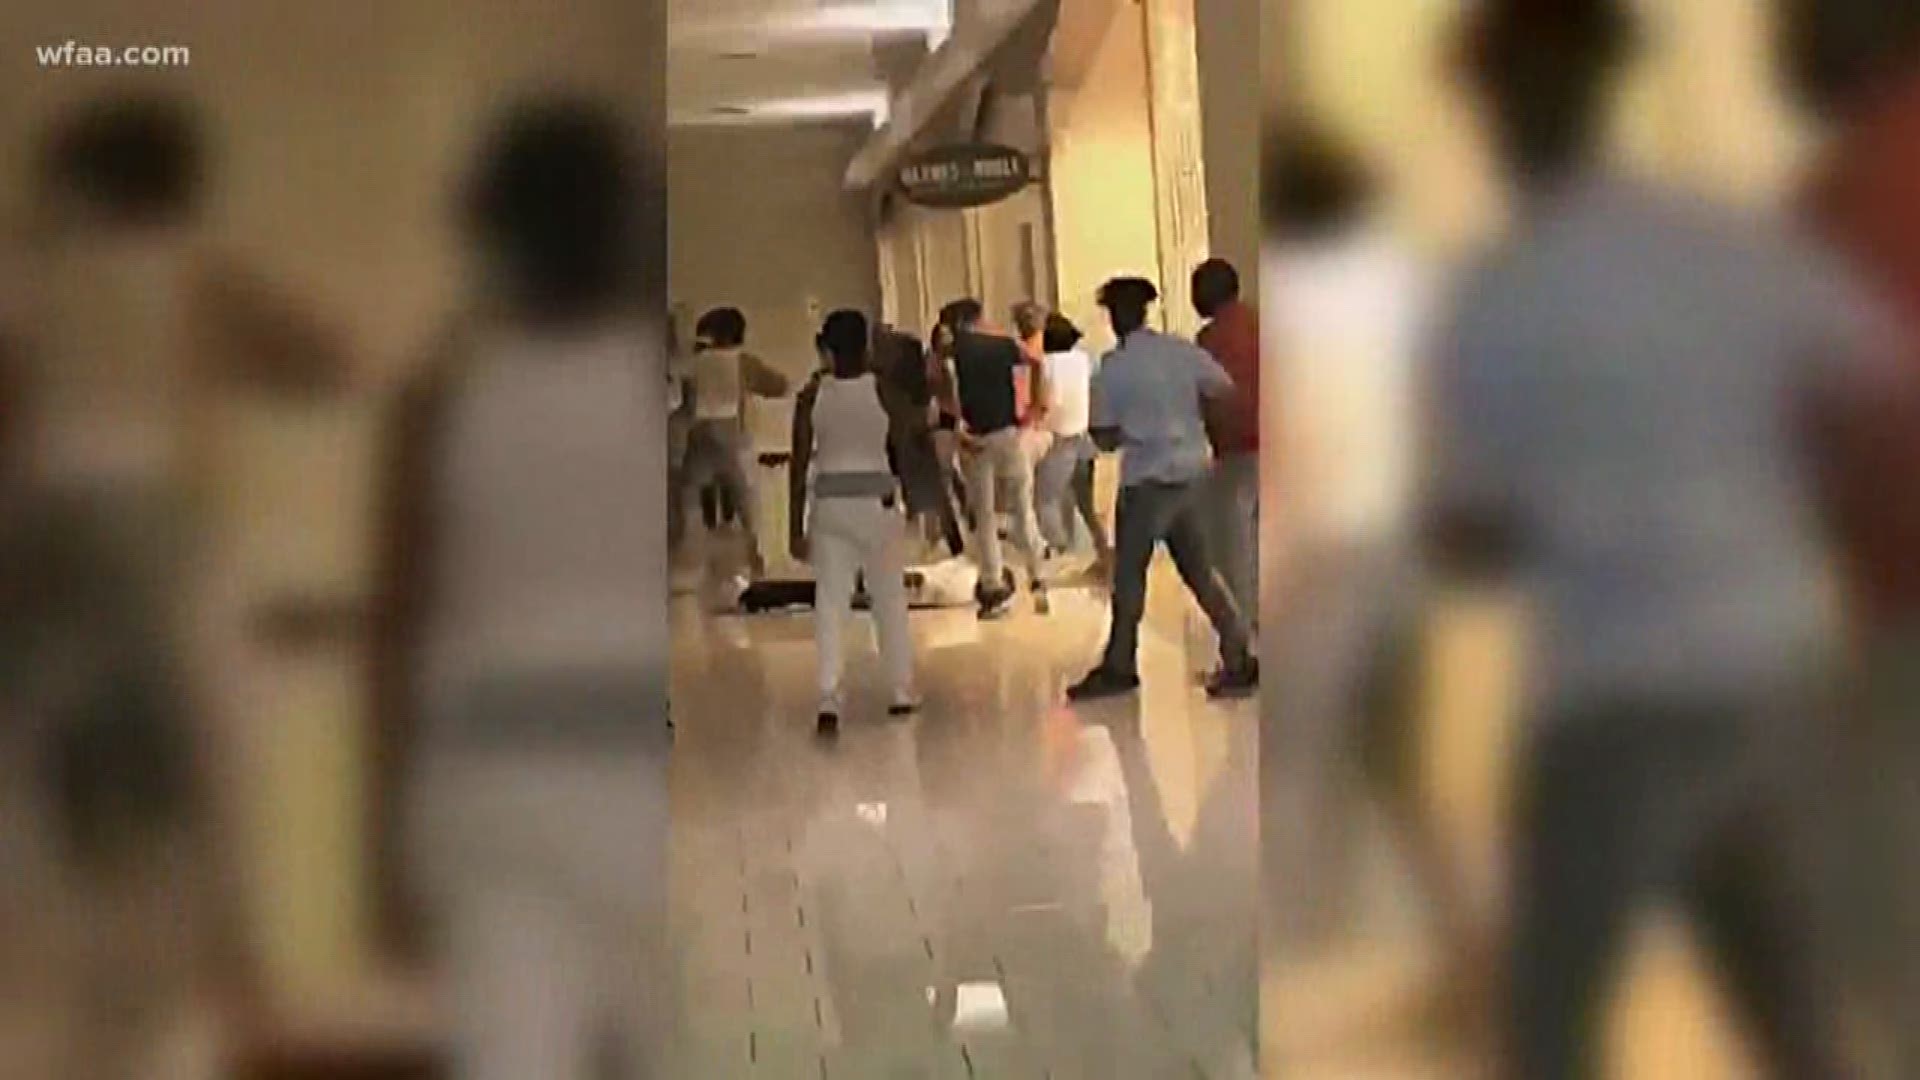 'I ain't sorry': Suspect in mall fight admits to stomping victim, says it was self-defense